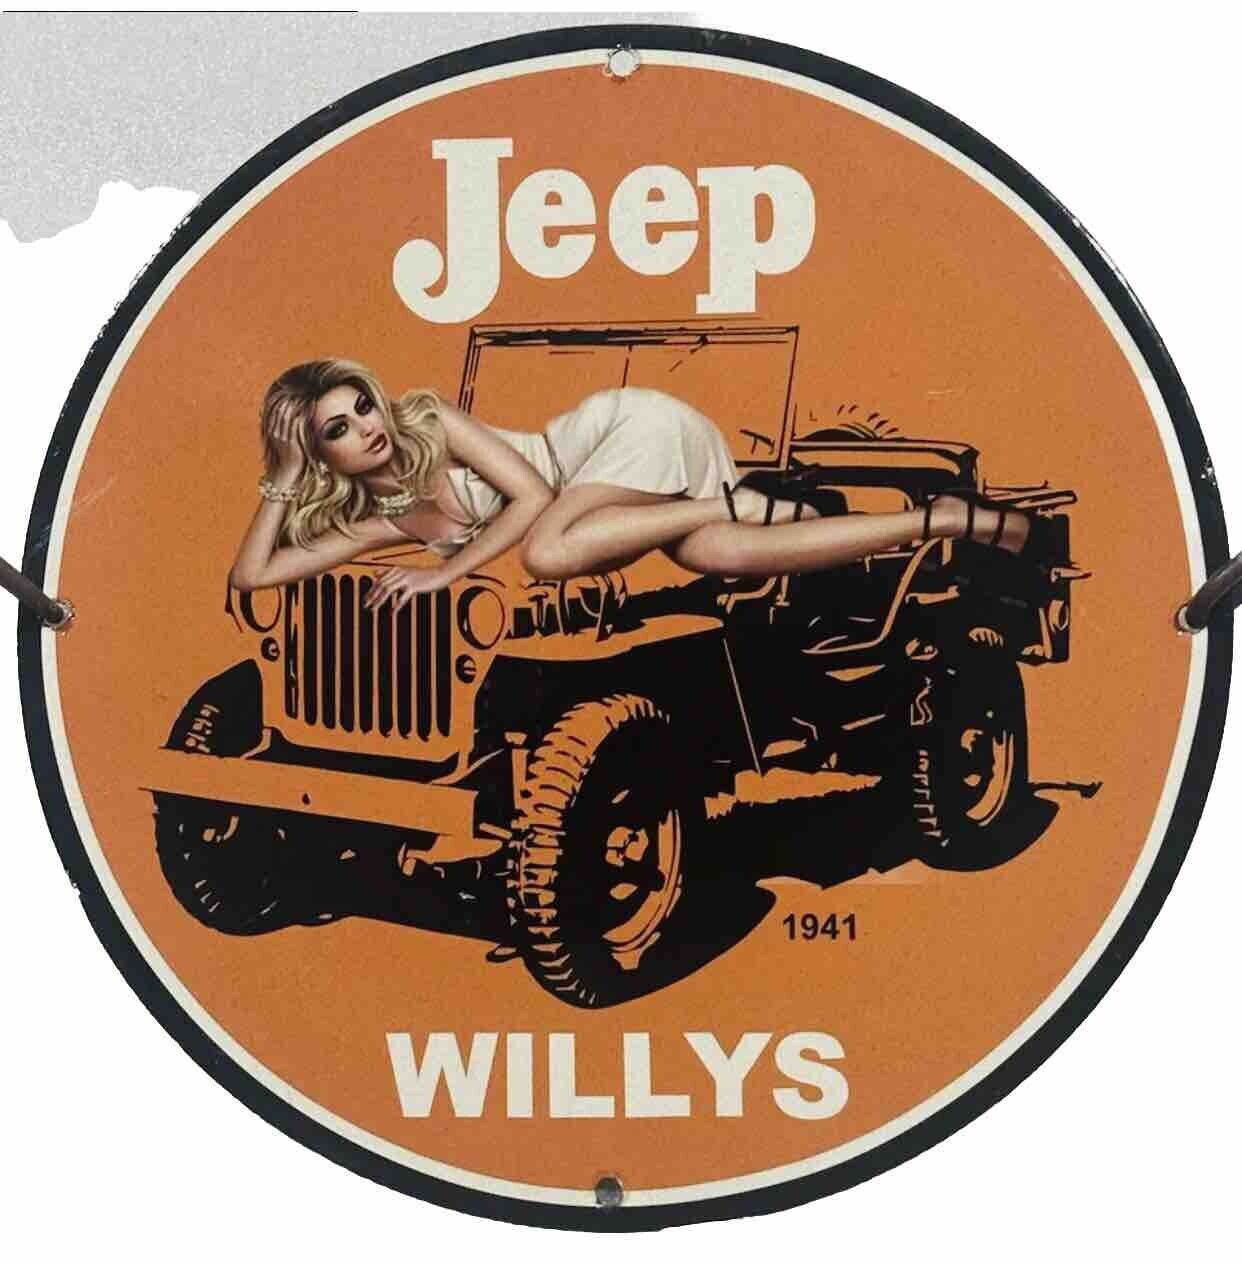 JEEP WILLYS PORCELAIN ENAMEL PINUP BABE GAS OIL GARAGE SERVICE PUMP PLATE SIGN